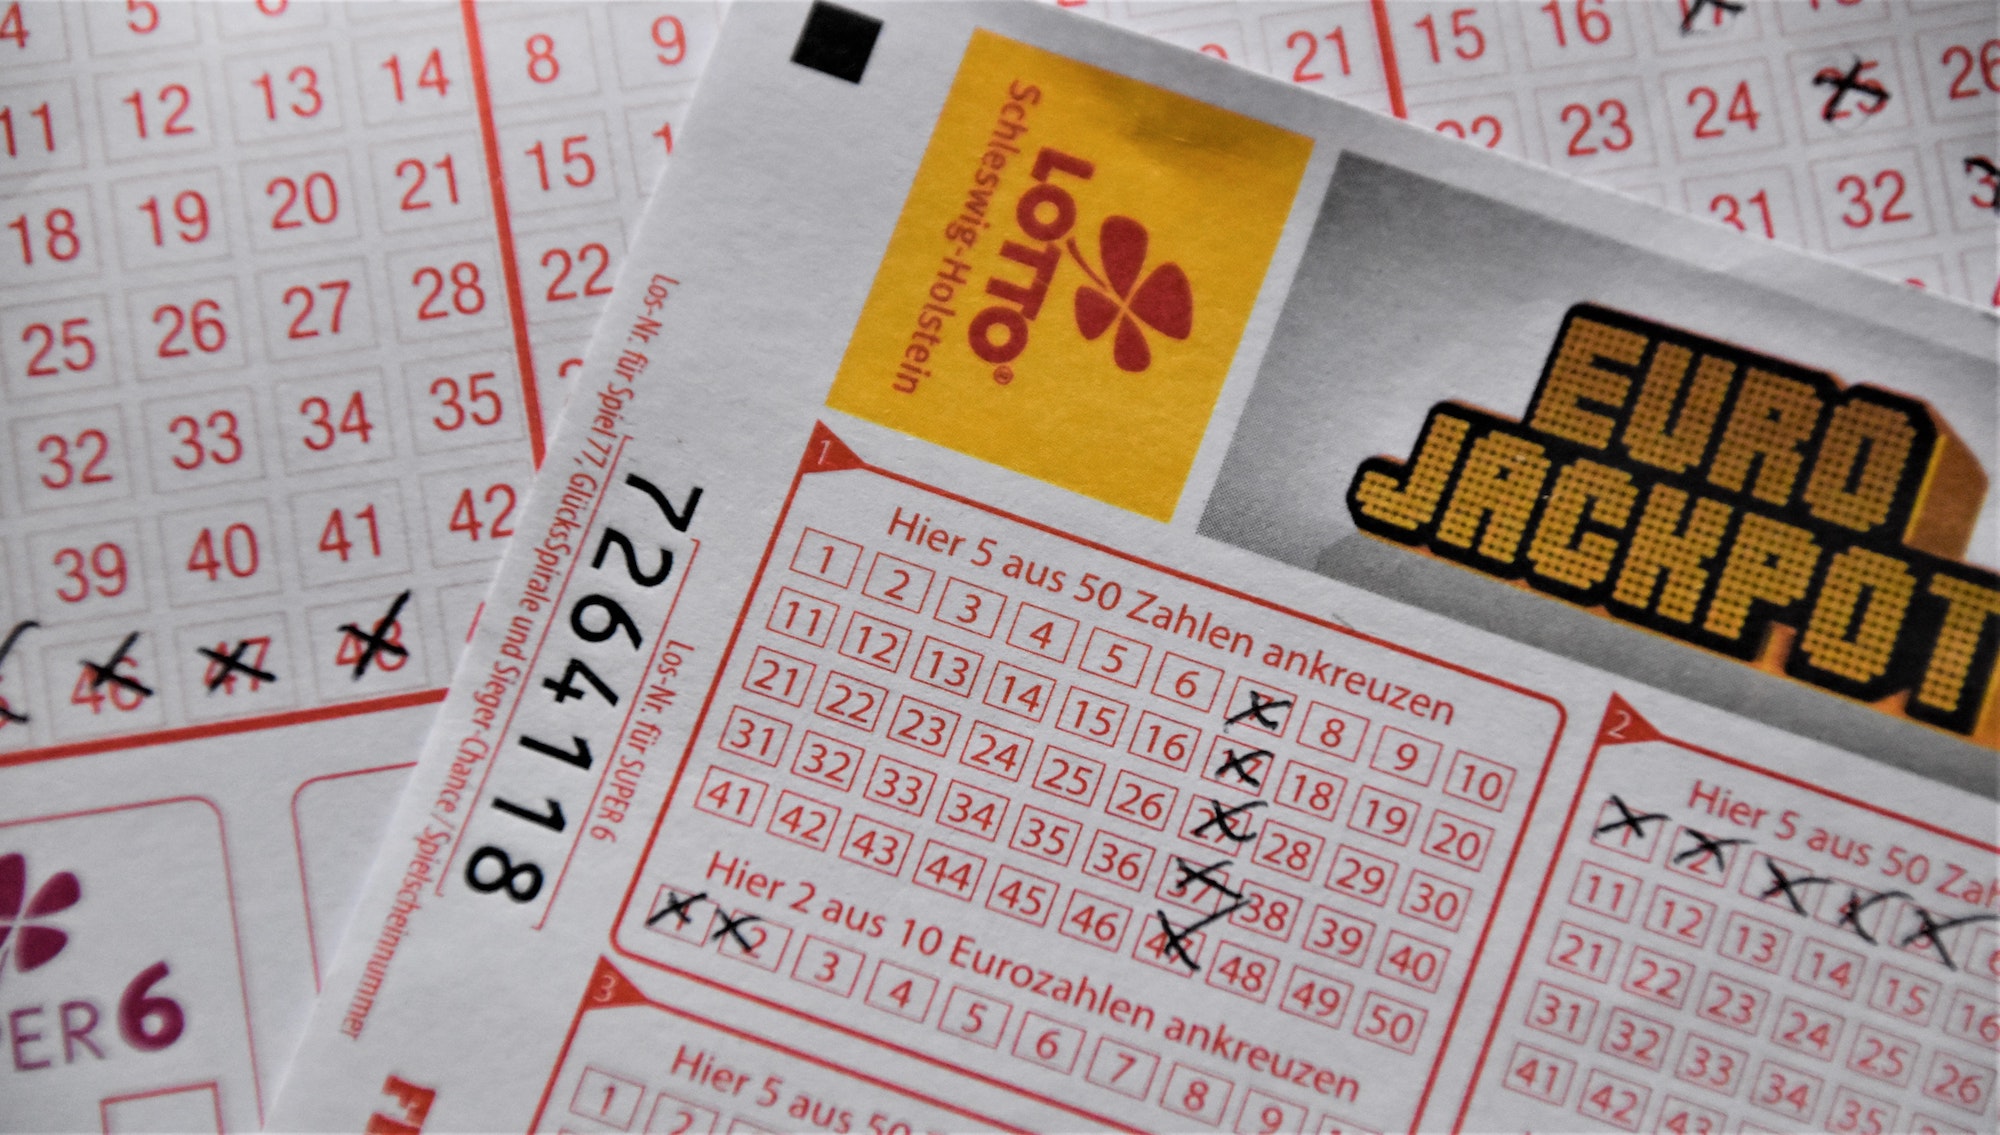 Lottery code